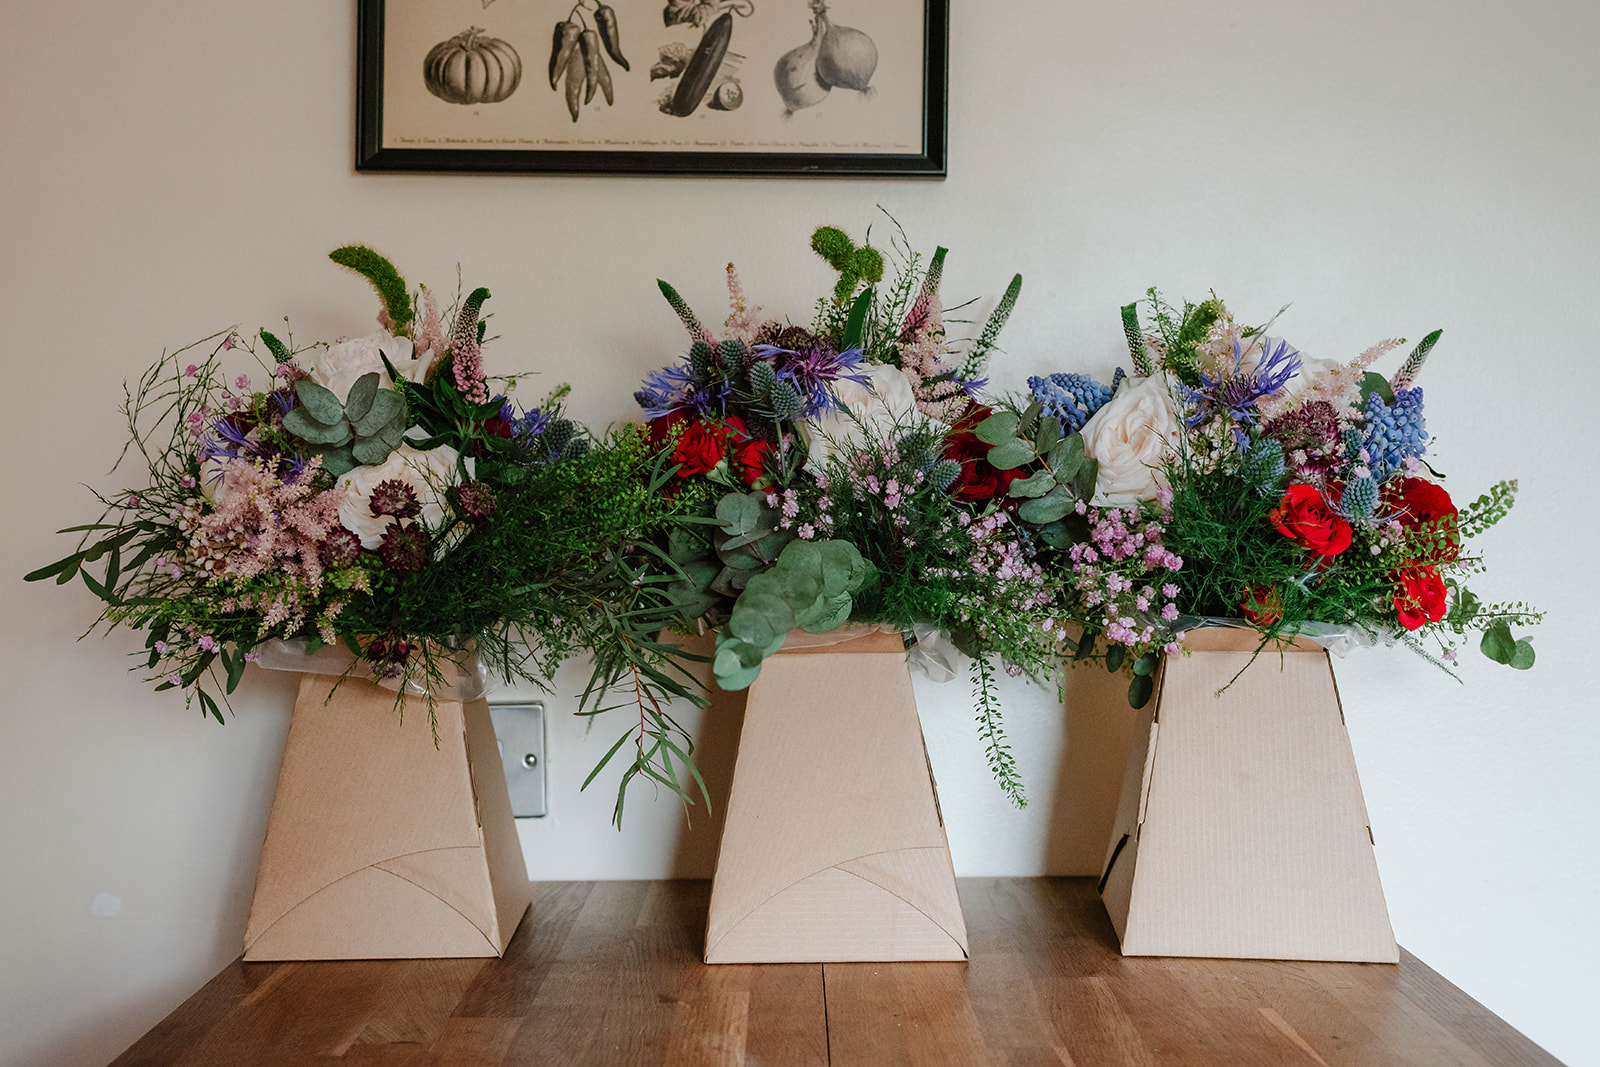 3 bridesmaids' bouquets on a table